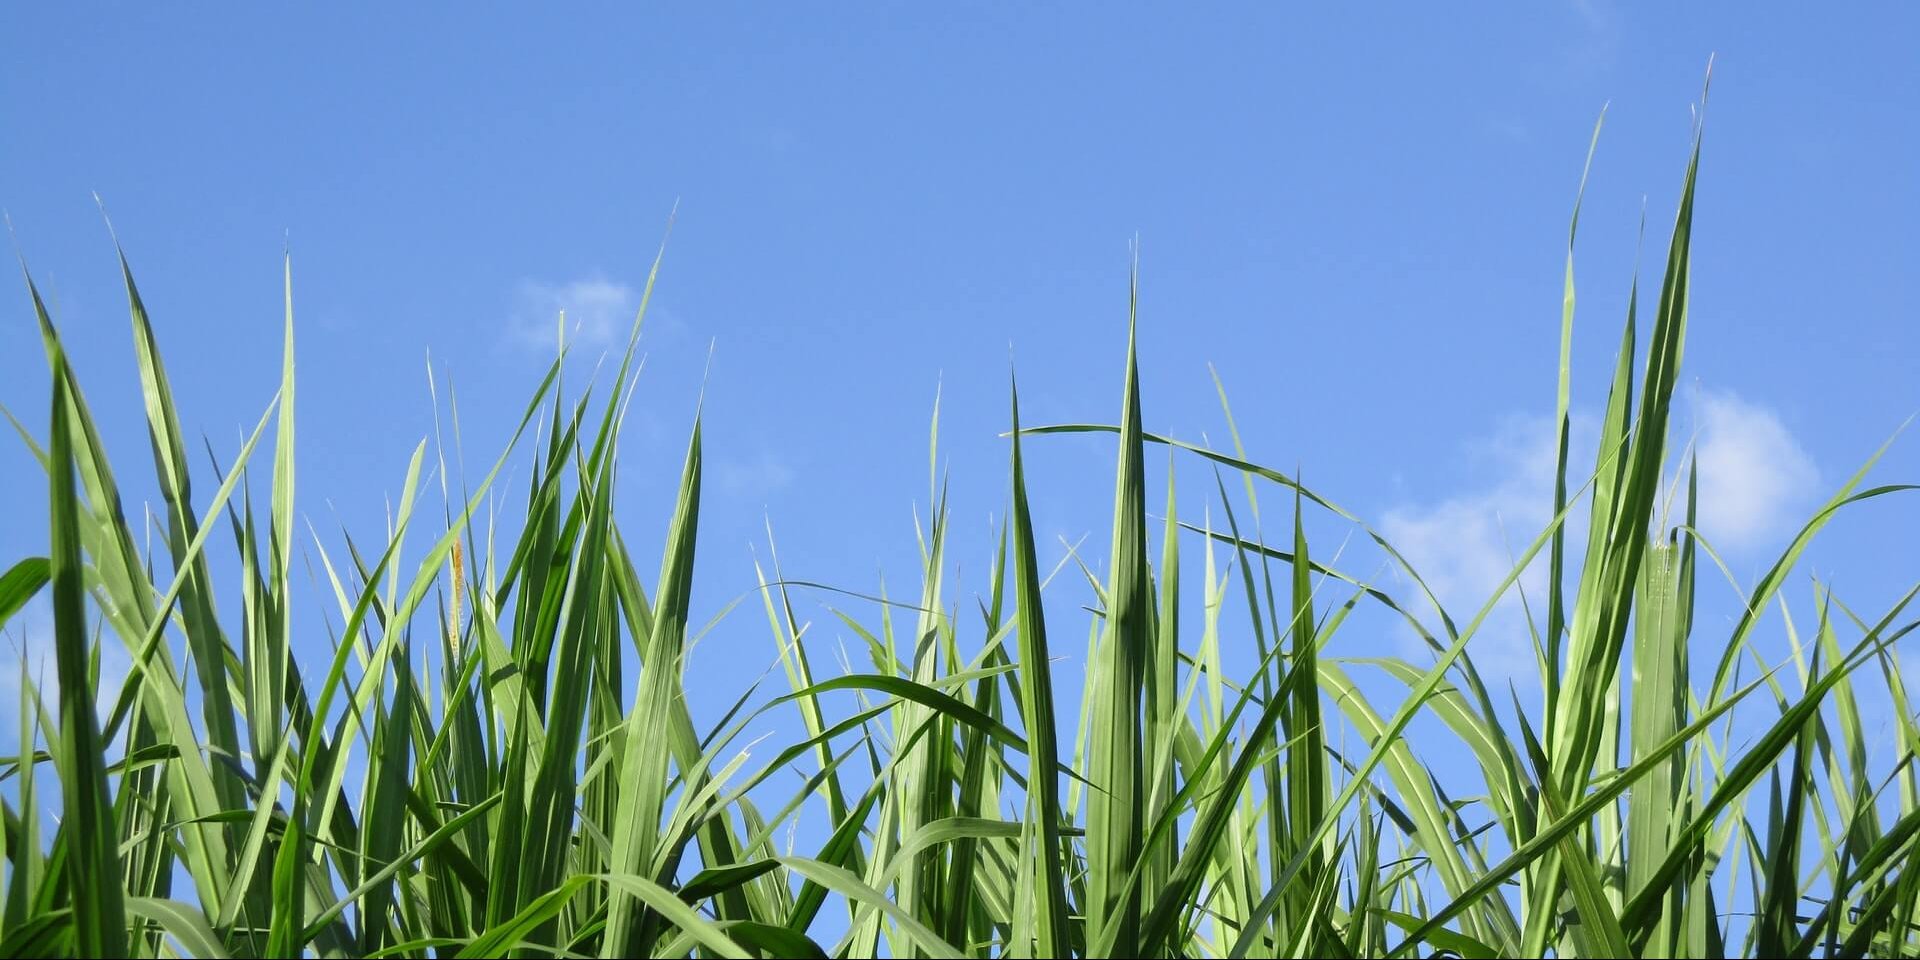 Tall grass and blue sky